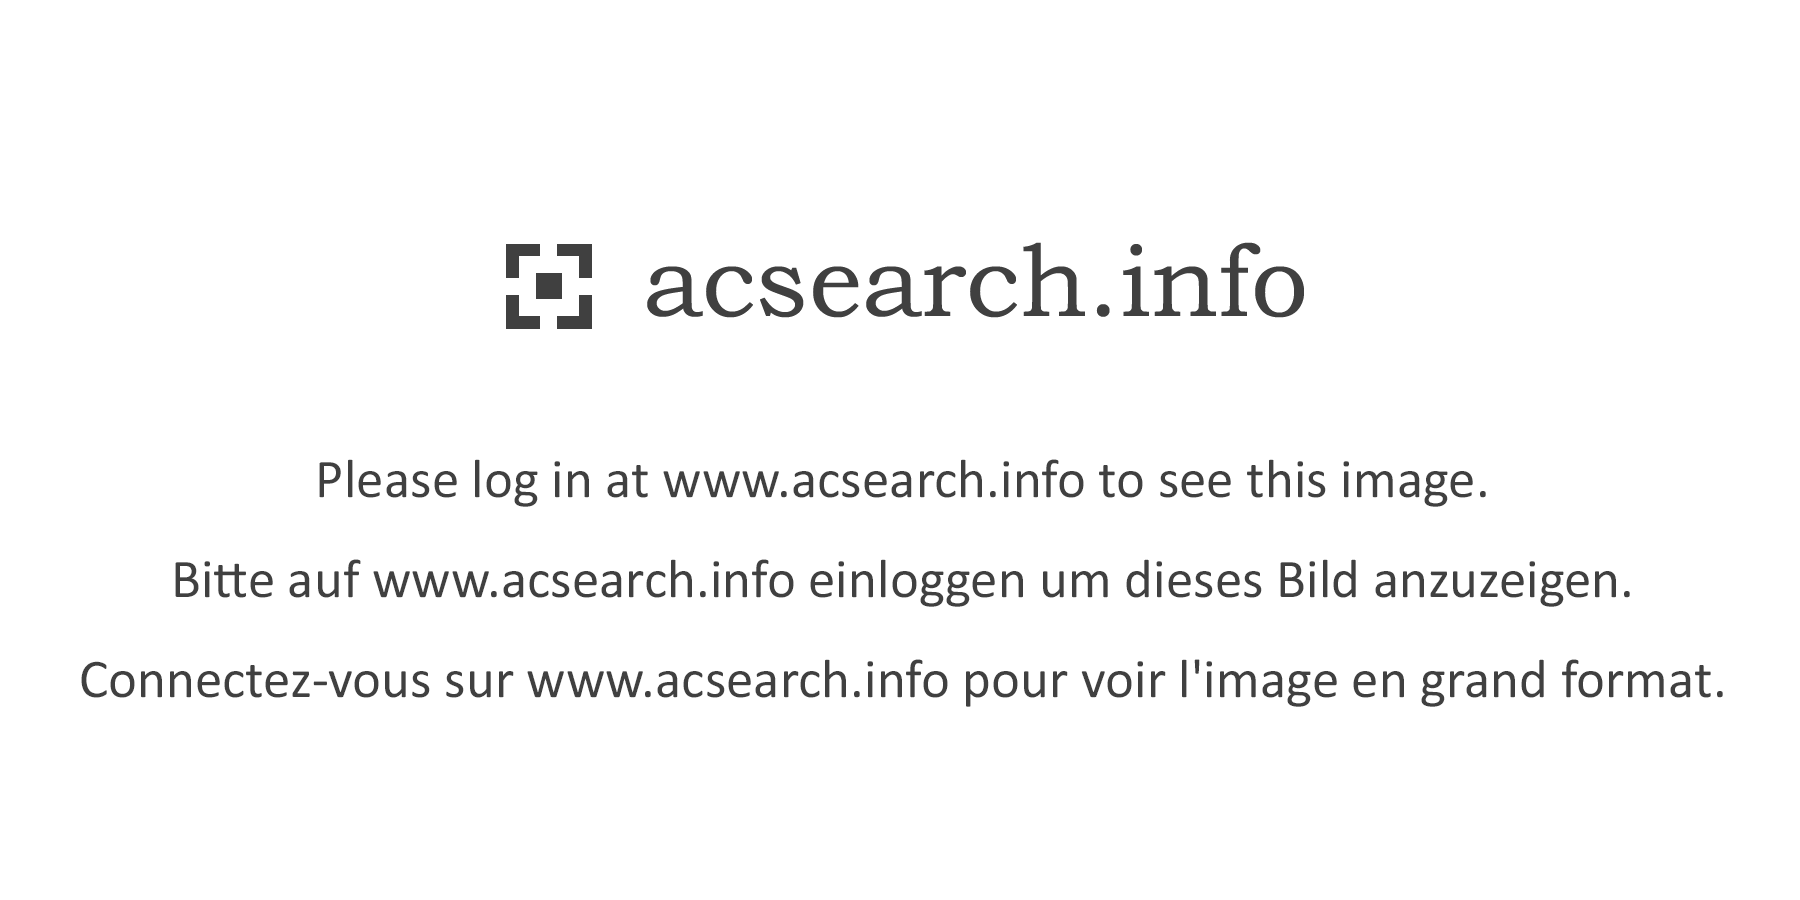 http://www.acsearch.info/media/images/archive/47/1532/1387449.jpg